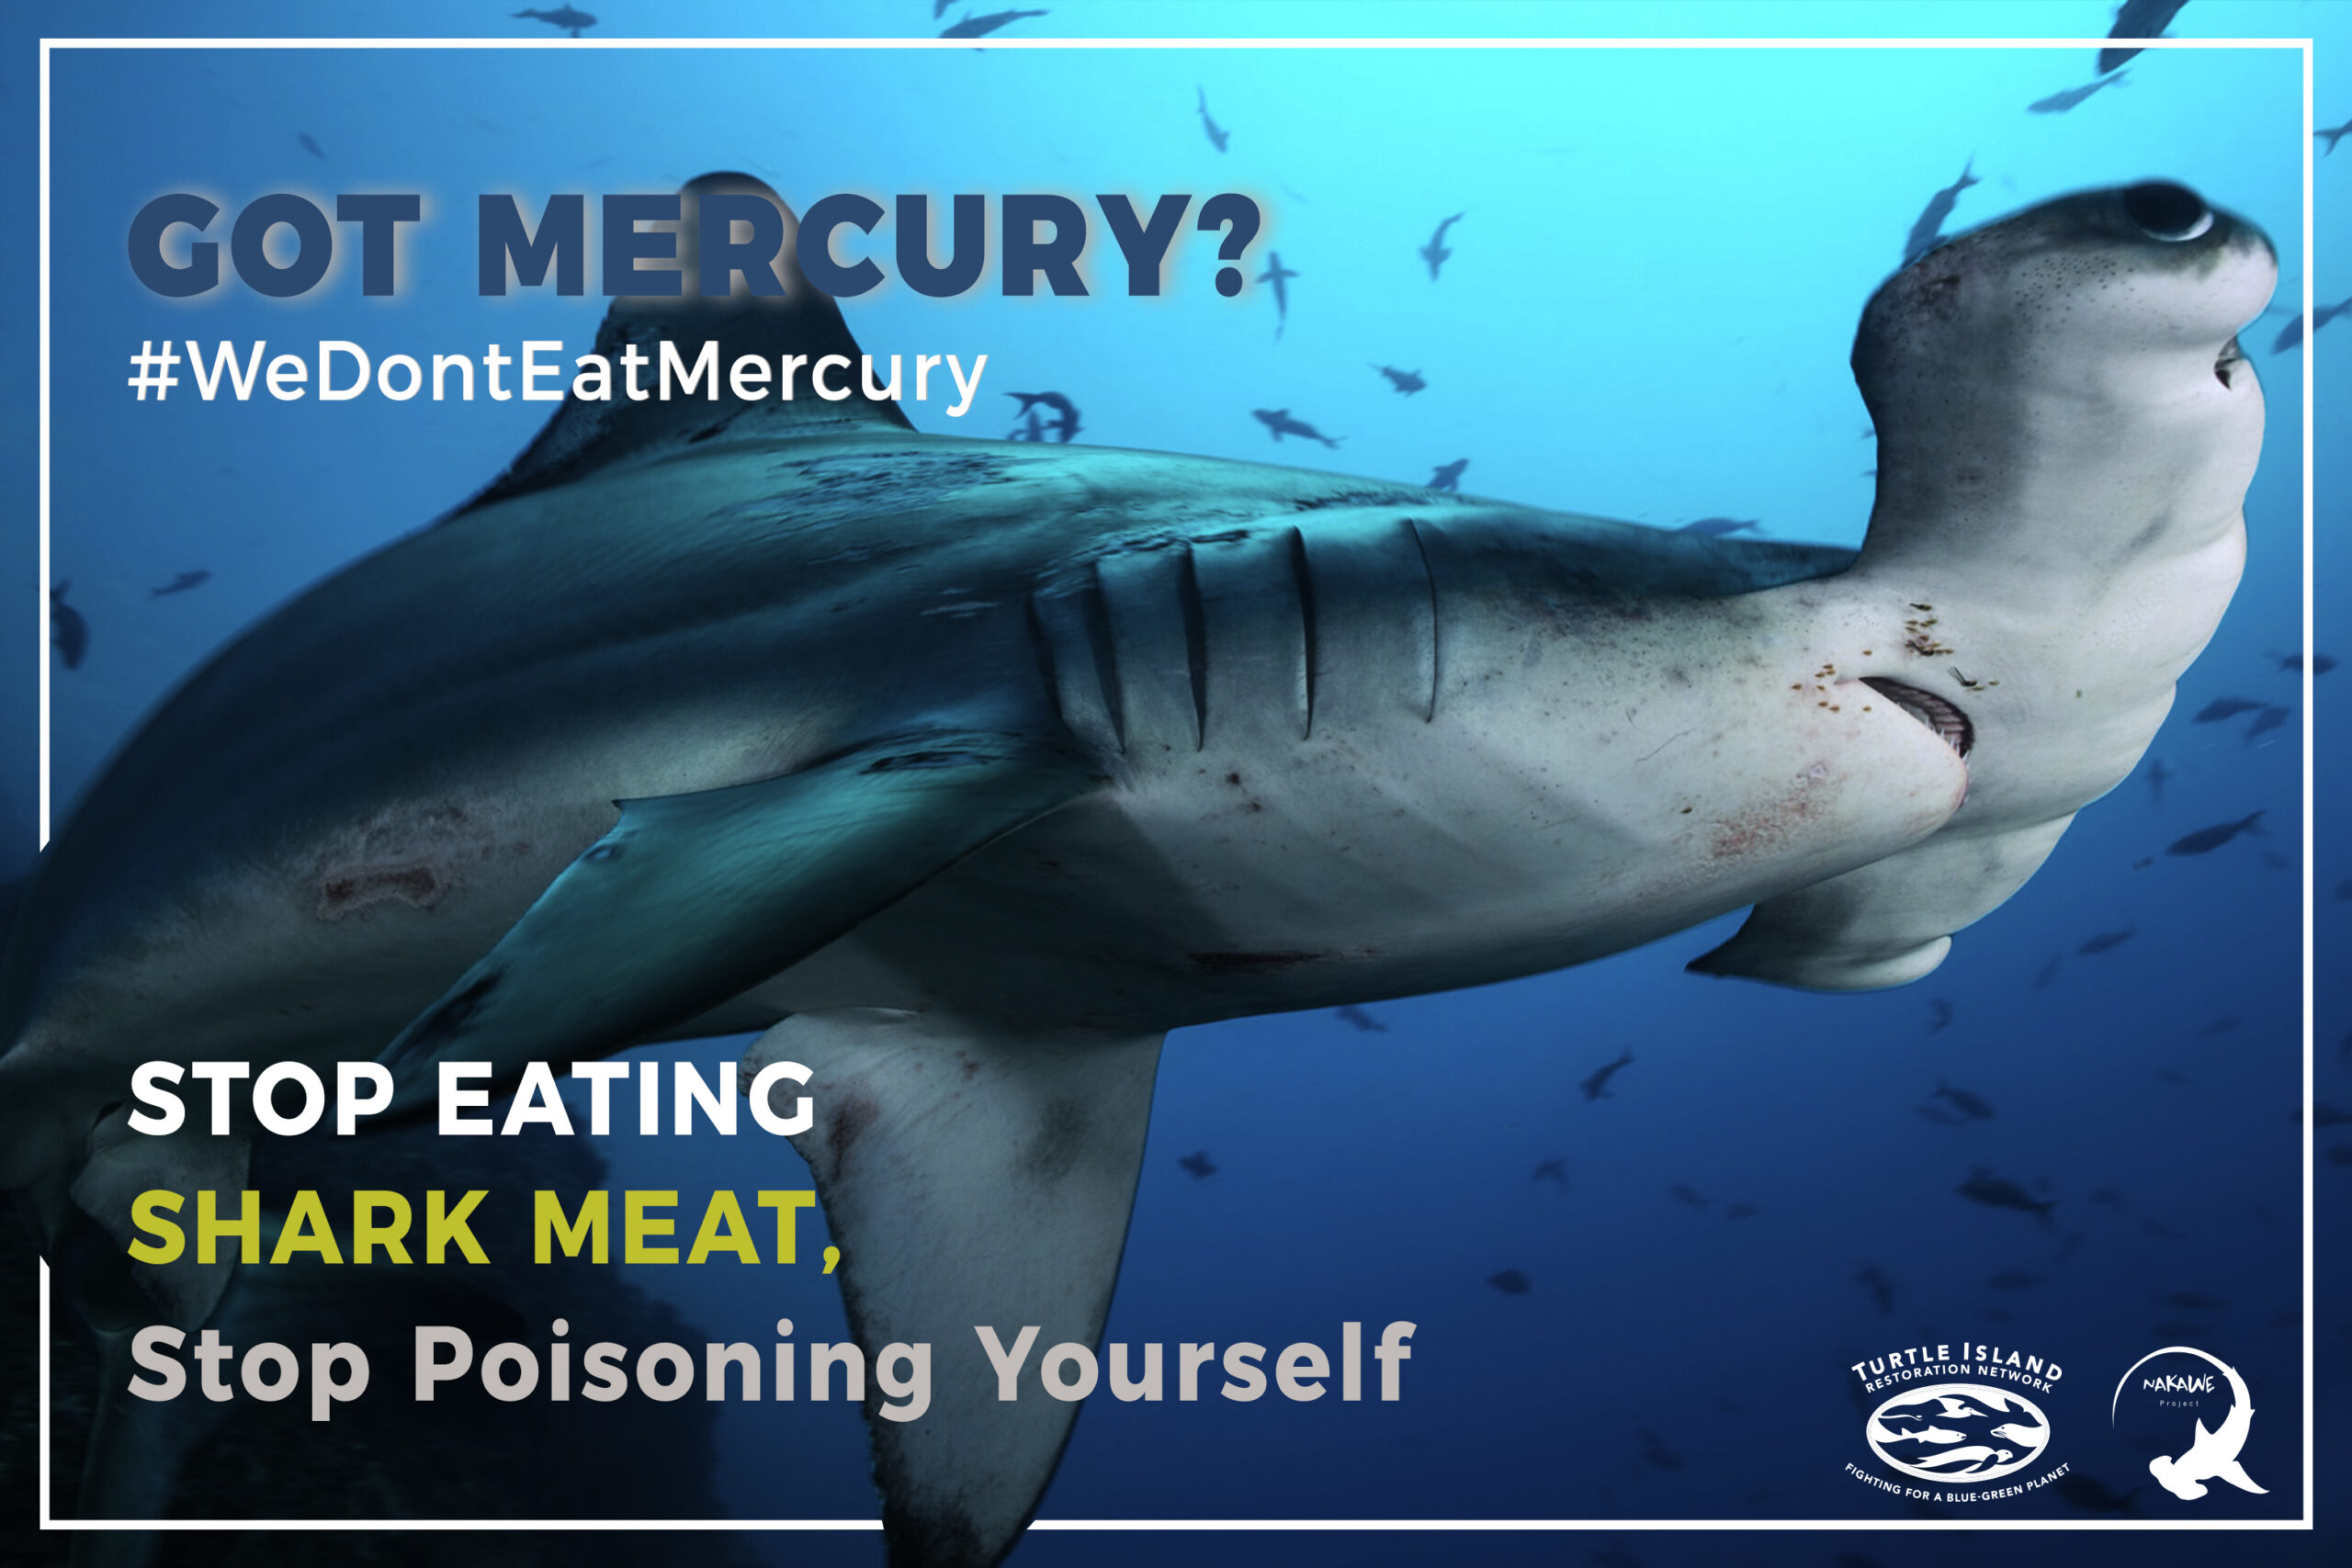 Campaign Launched in Mexico to Warn About the Health Risks of Eating Shark Meat